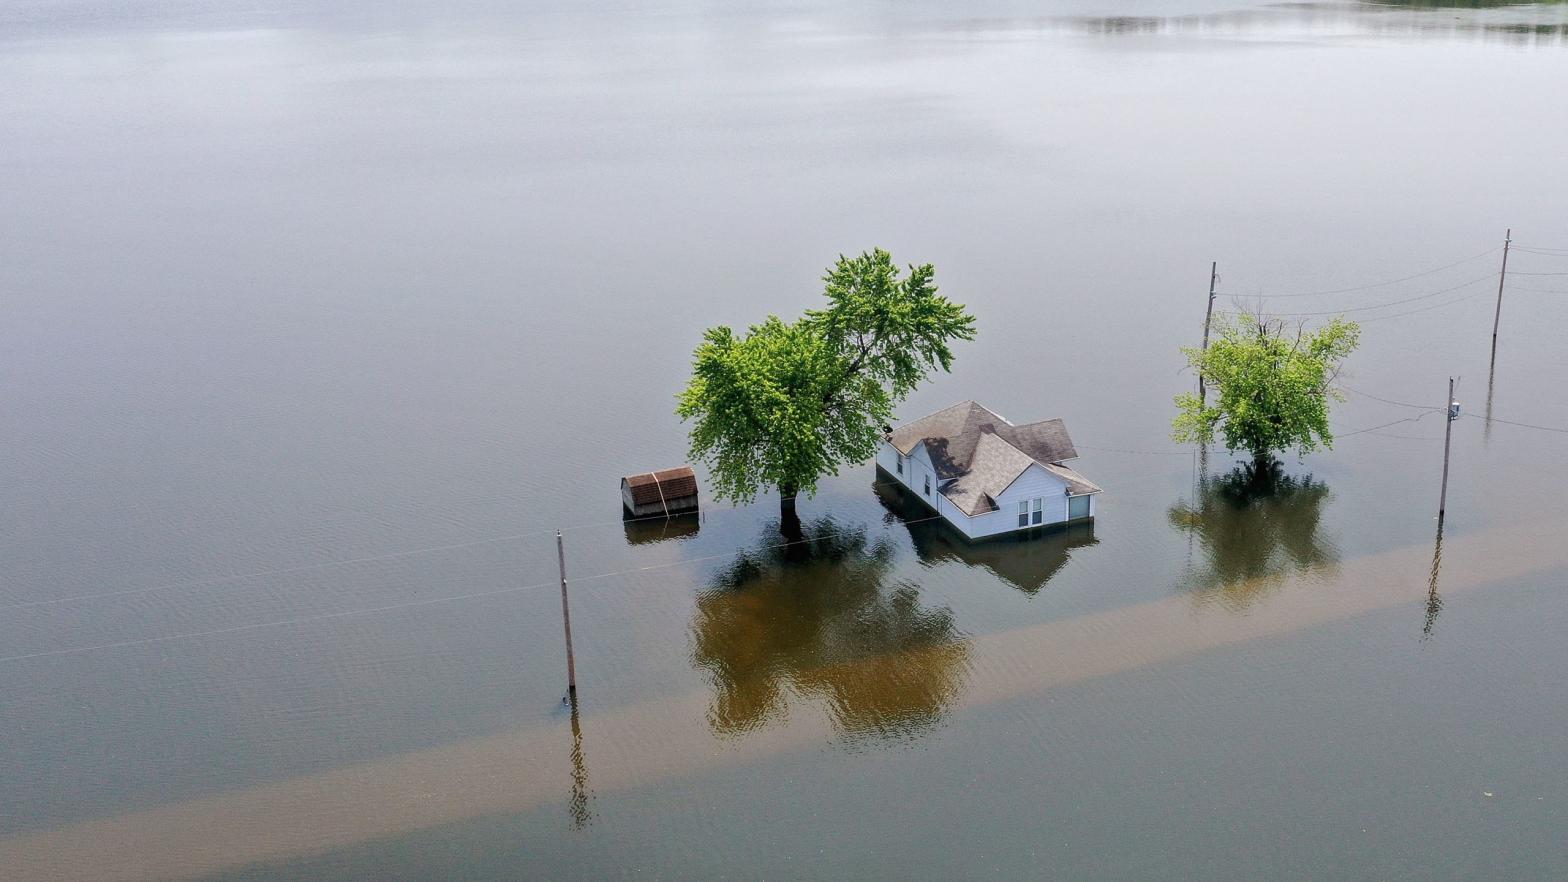 Floodwaters from the Mississippi River rise around a home on June 1, 2019 in West Alton, Missouri. (Photo: Scott Olson, Getty Images)